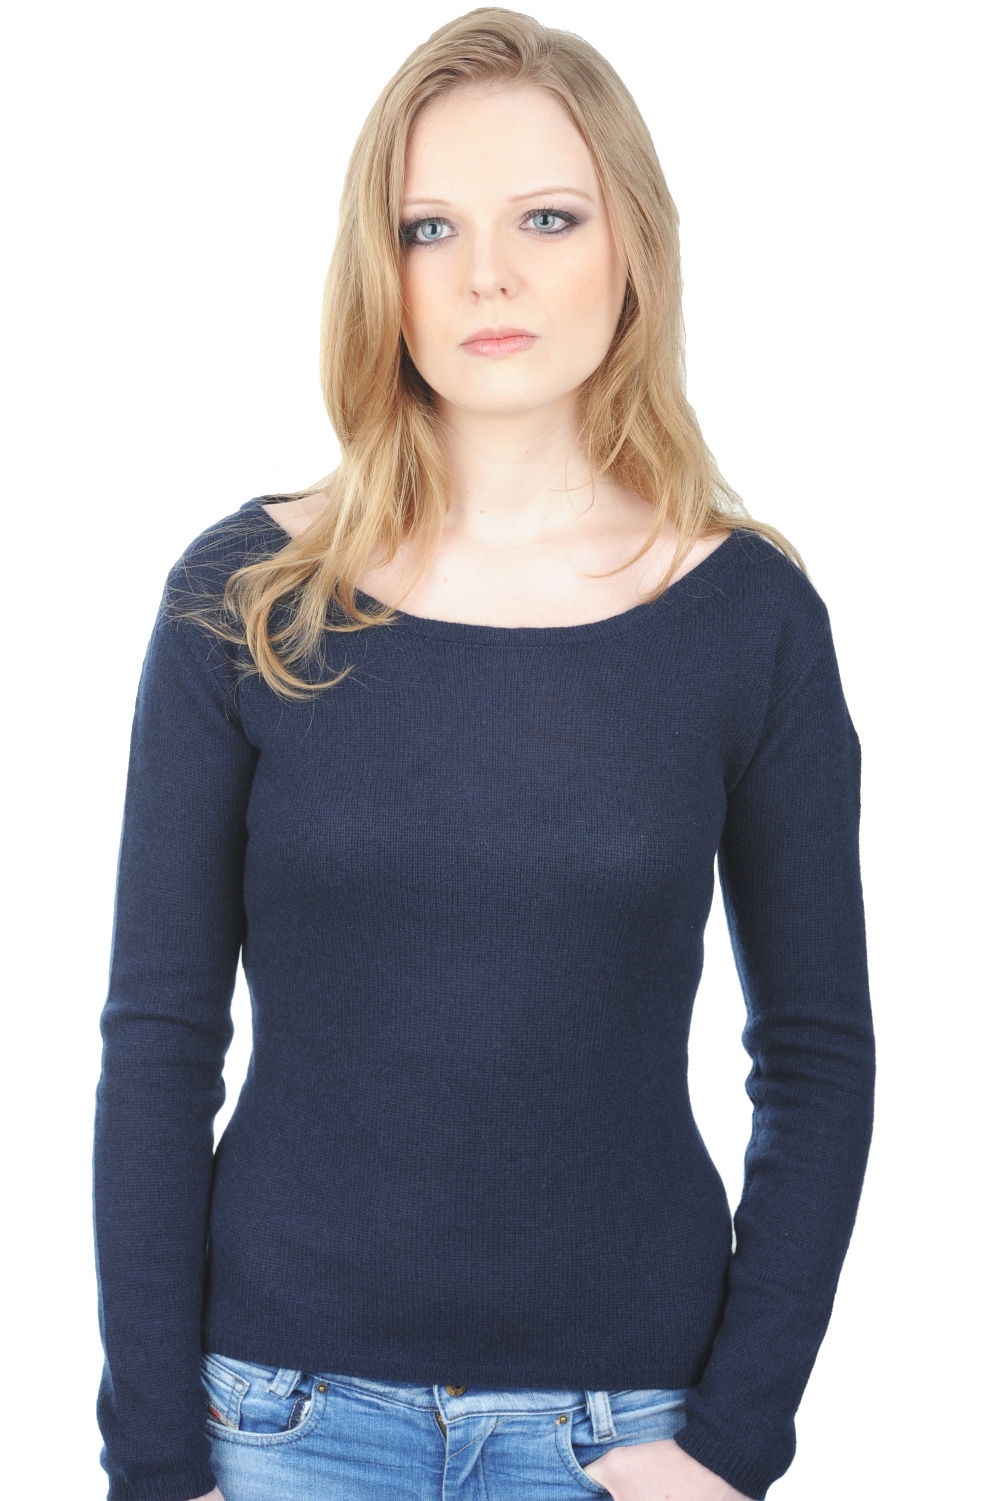 Cashmere ladies basic sweaters at low prices caleen dress blue 2xl